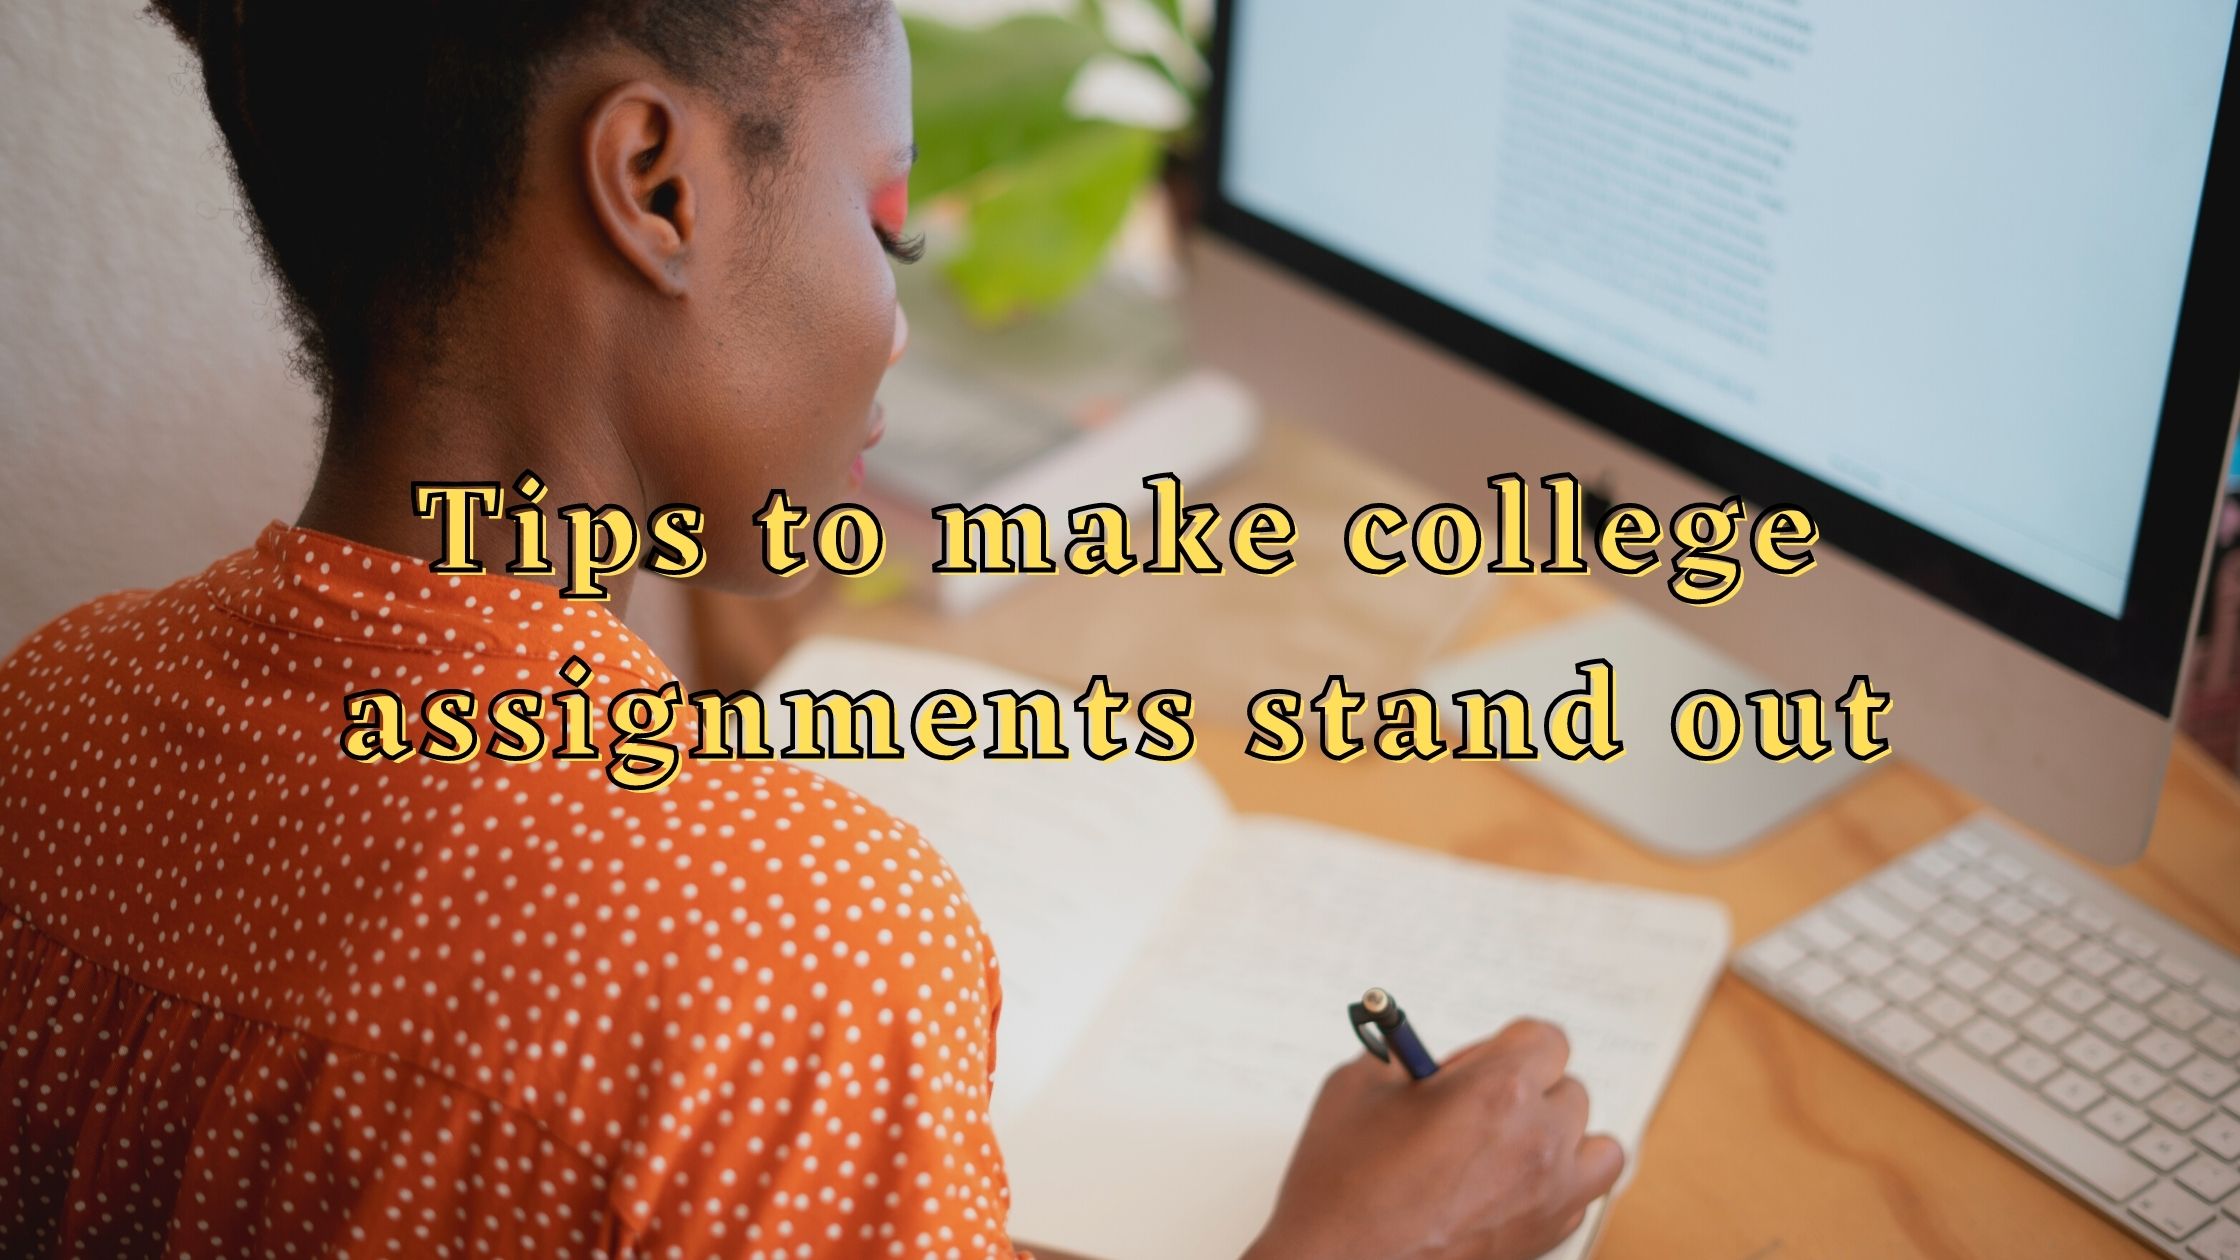 Tips to make college assignments stand out